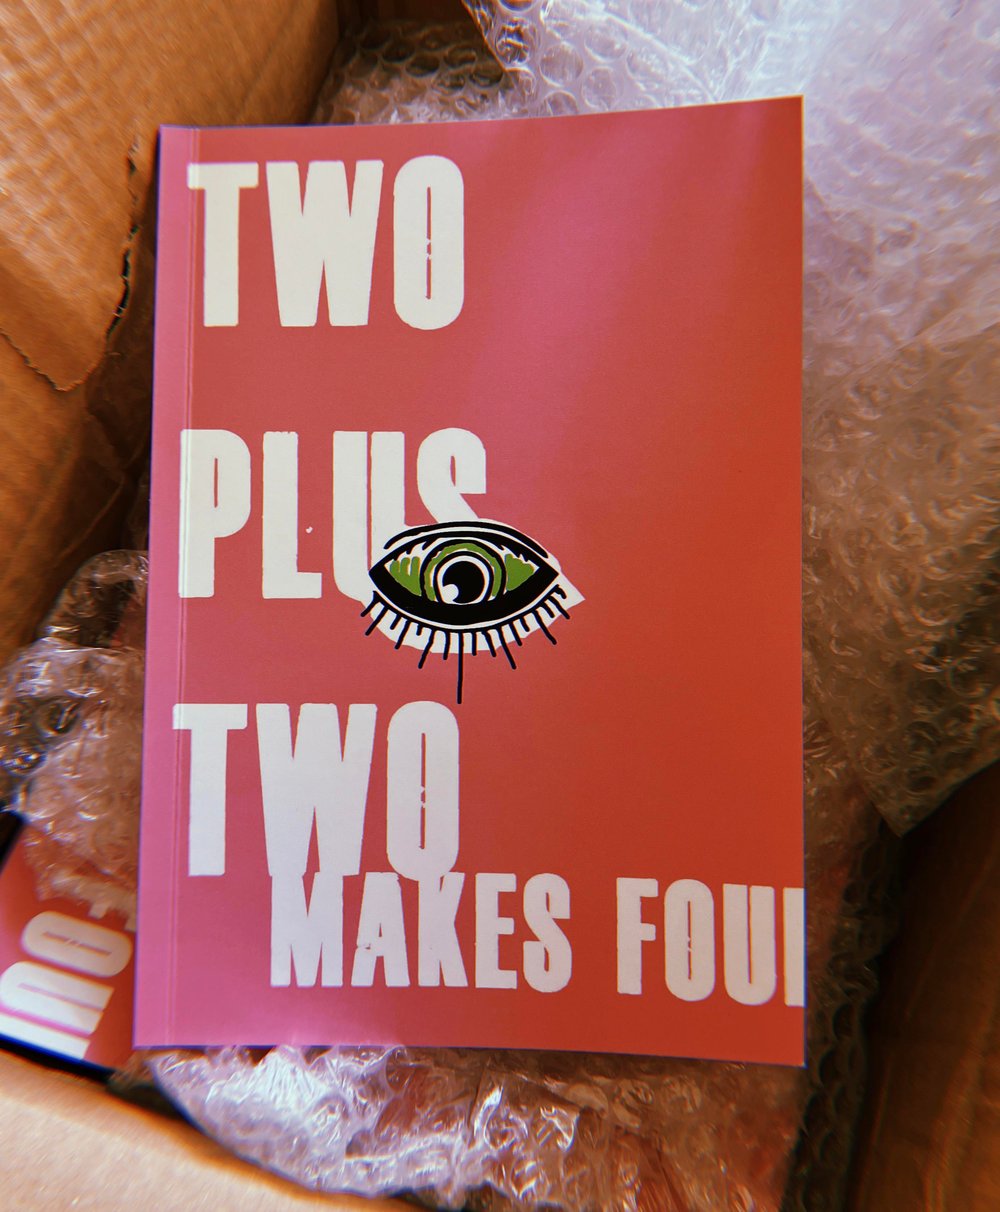 Image of Two Plus Two Makes Four exhibition catalogue